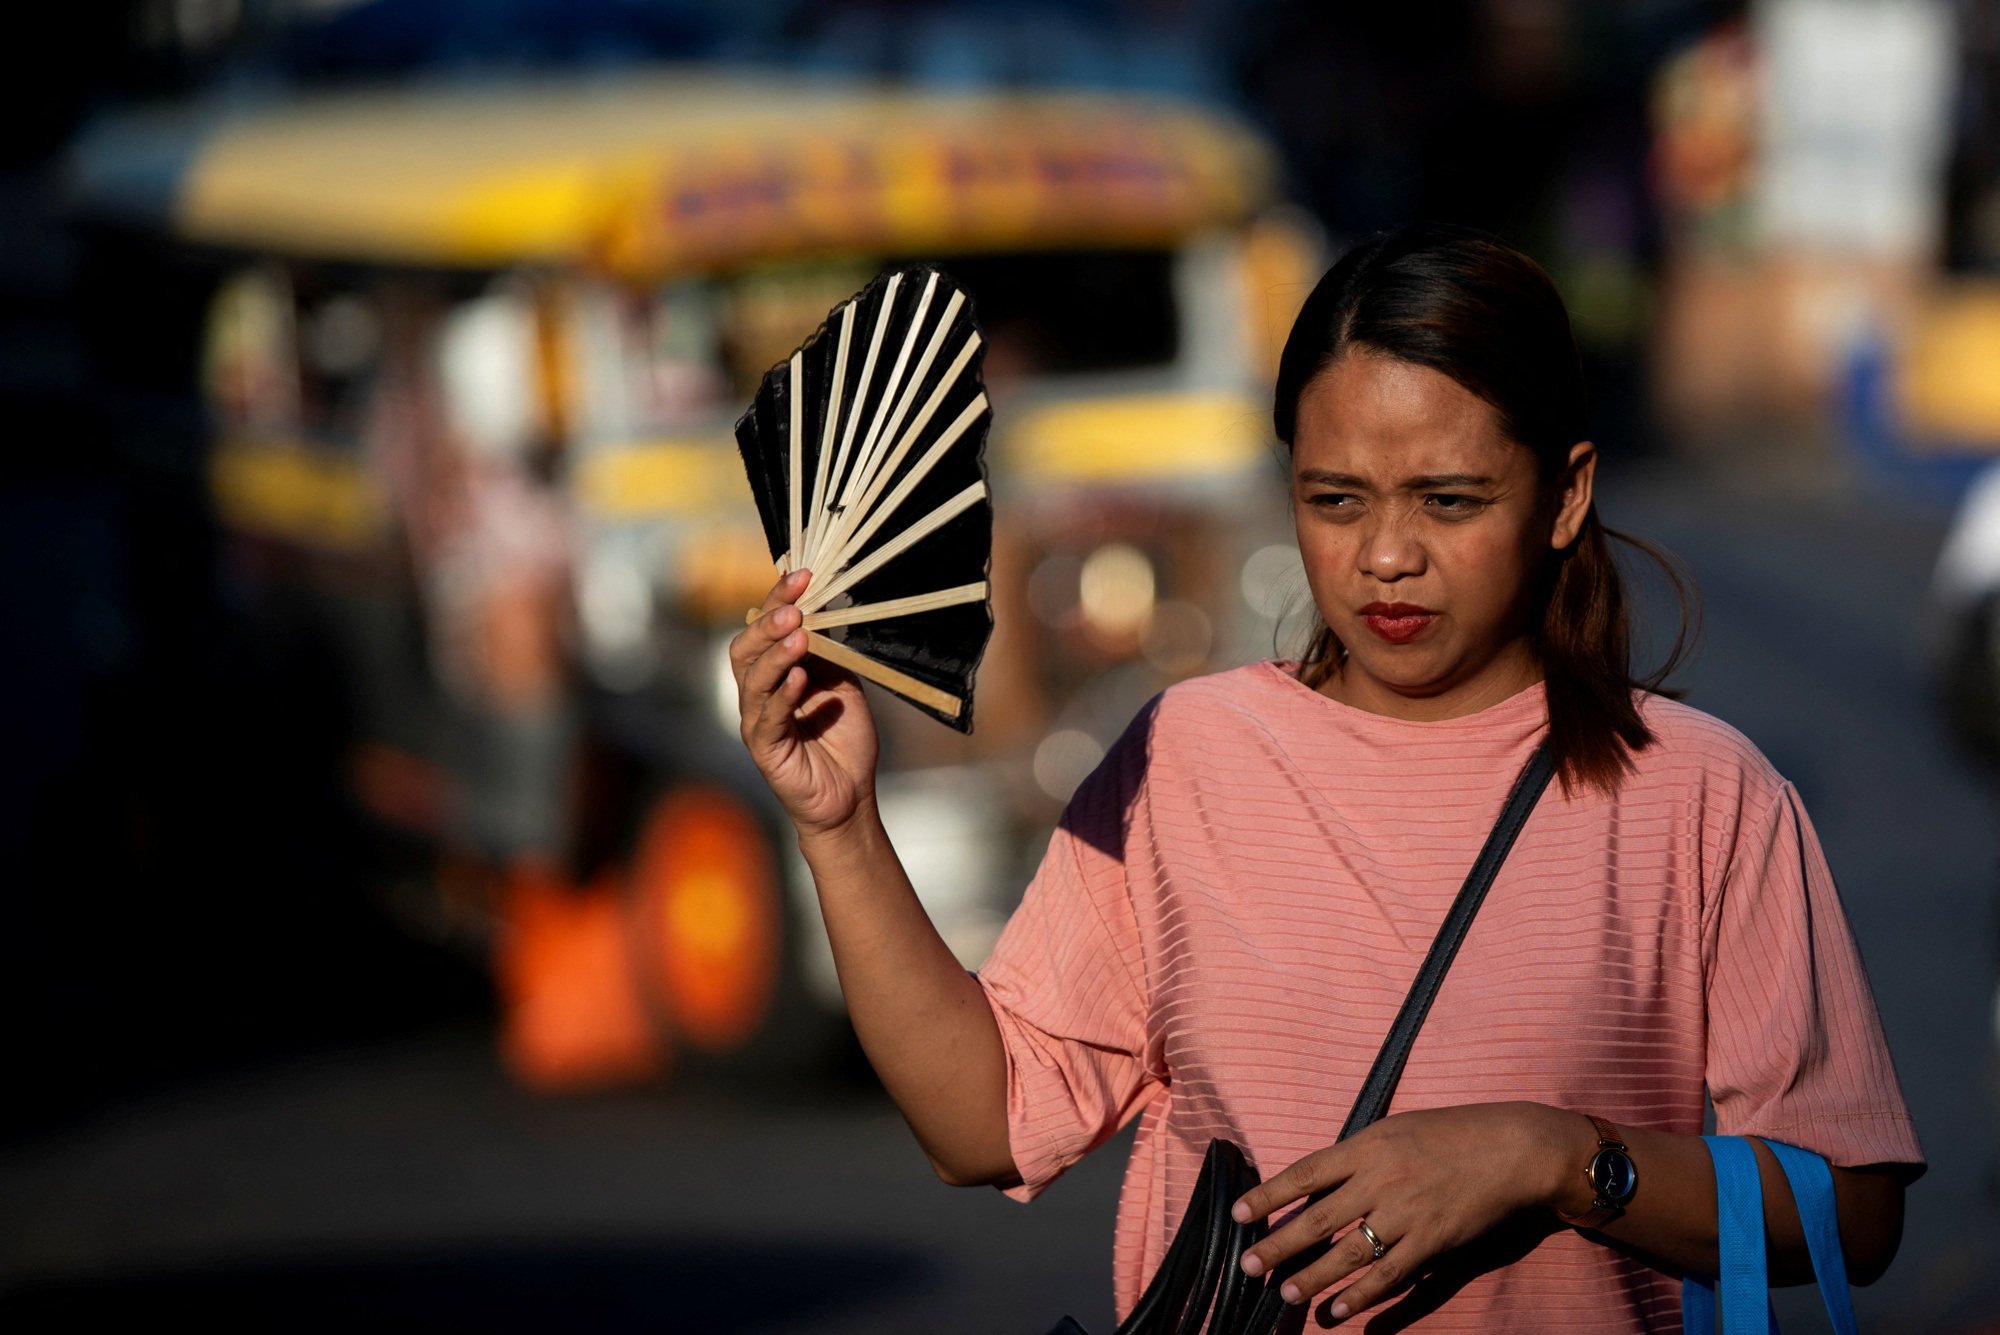 A woman uses a hand fan to cool herself down during a hot day in Manila last week. Sweltering temperatures in the Philippine capital have forced many schools to switch to remote learning. Photo: Reuters